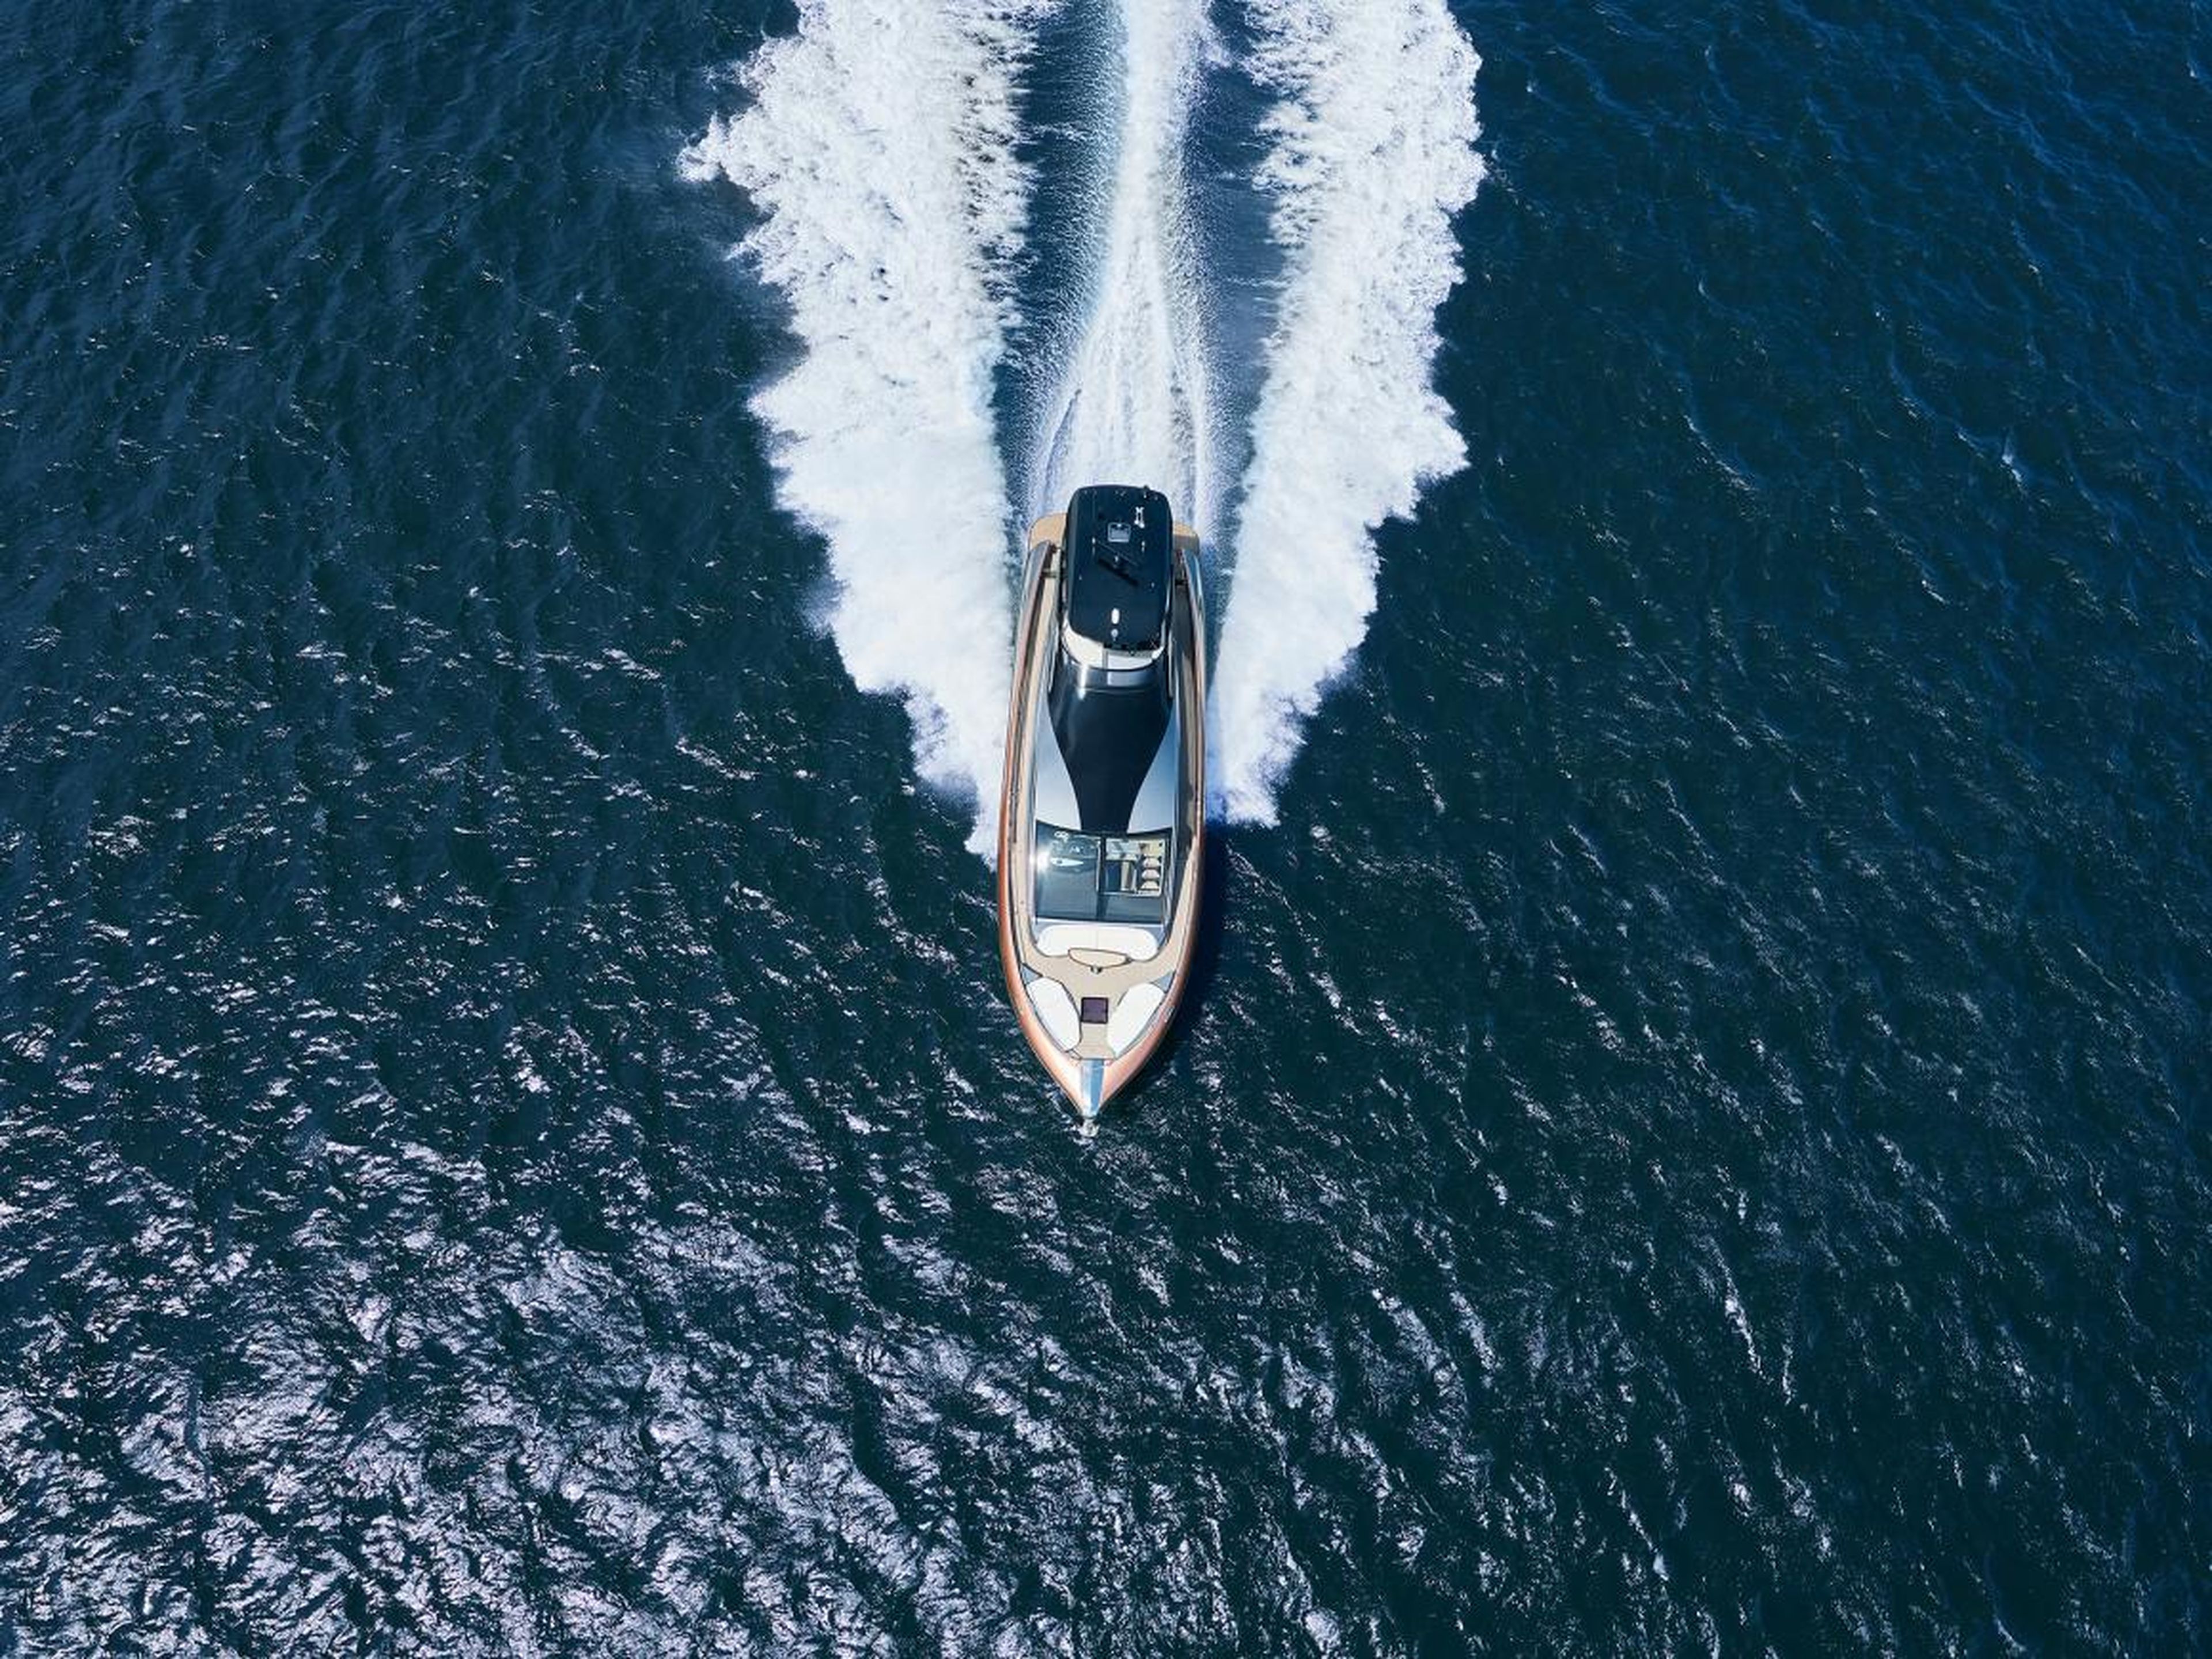 The starting cost for the yacht is $3.74 million, with prices going up to $4.85 million for a model that includes all available optional features.